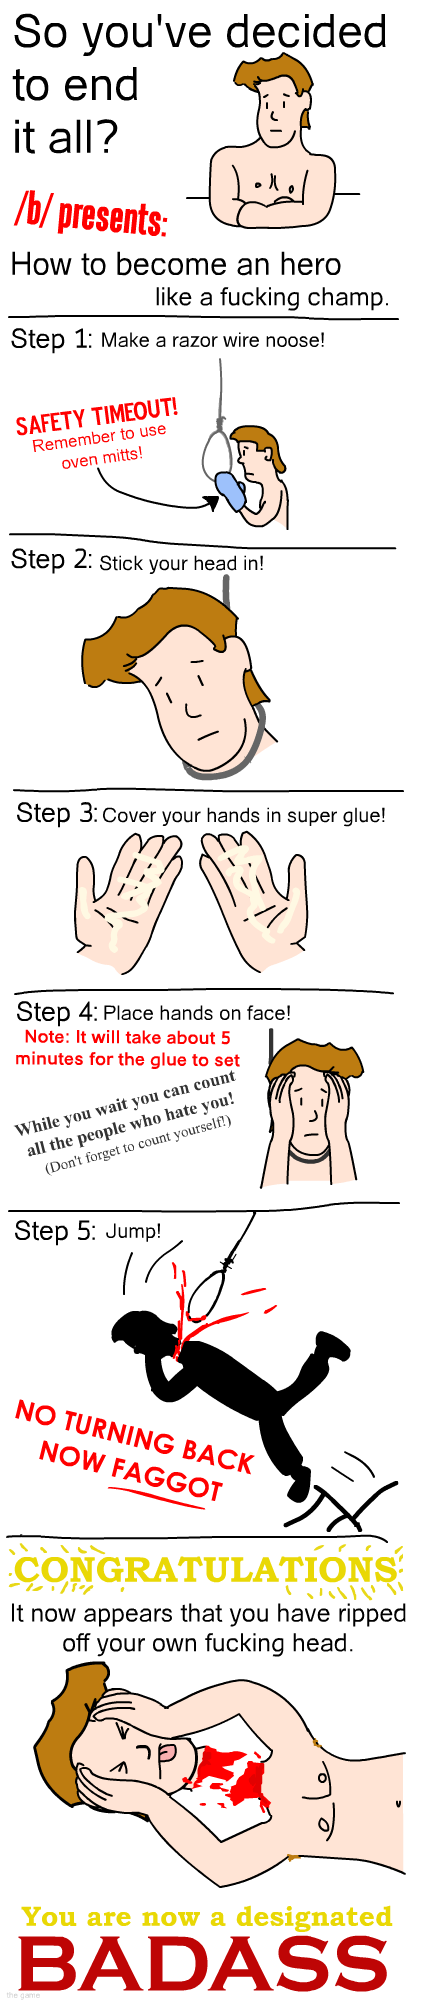 how to become a hero. if you like my thumbs it up or dont its your choice just check out the rest of page there might be something you like.&lt;br /&gt; &lt;a h